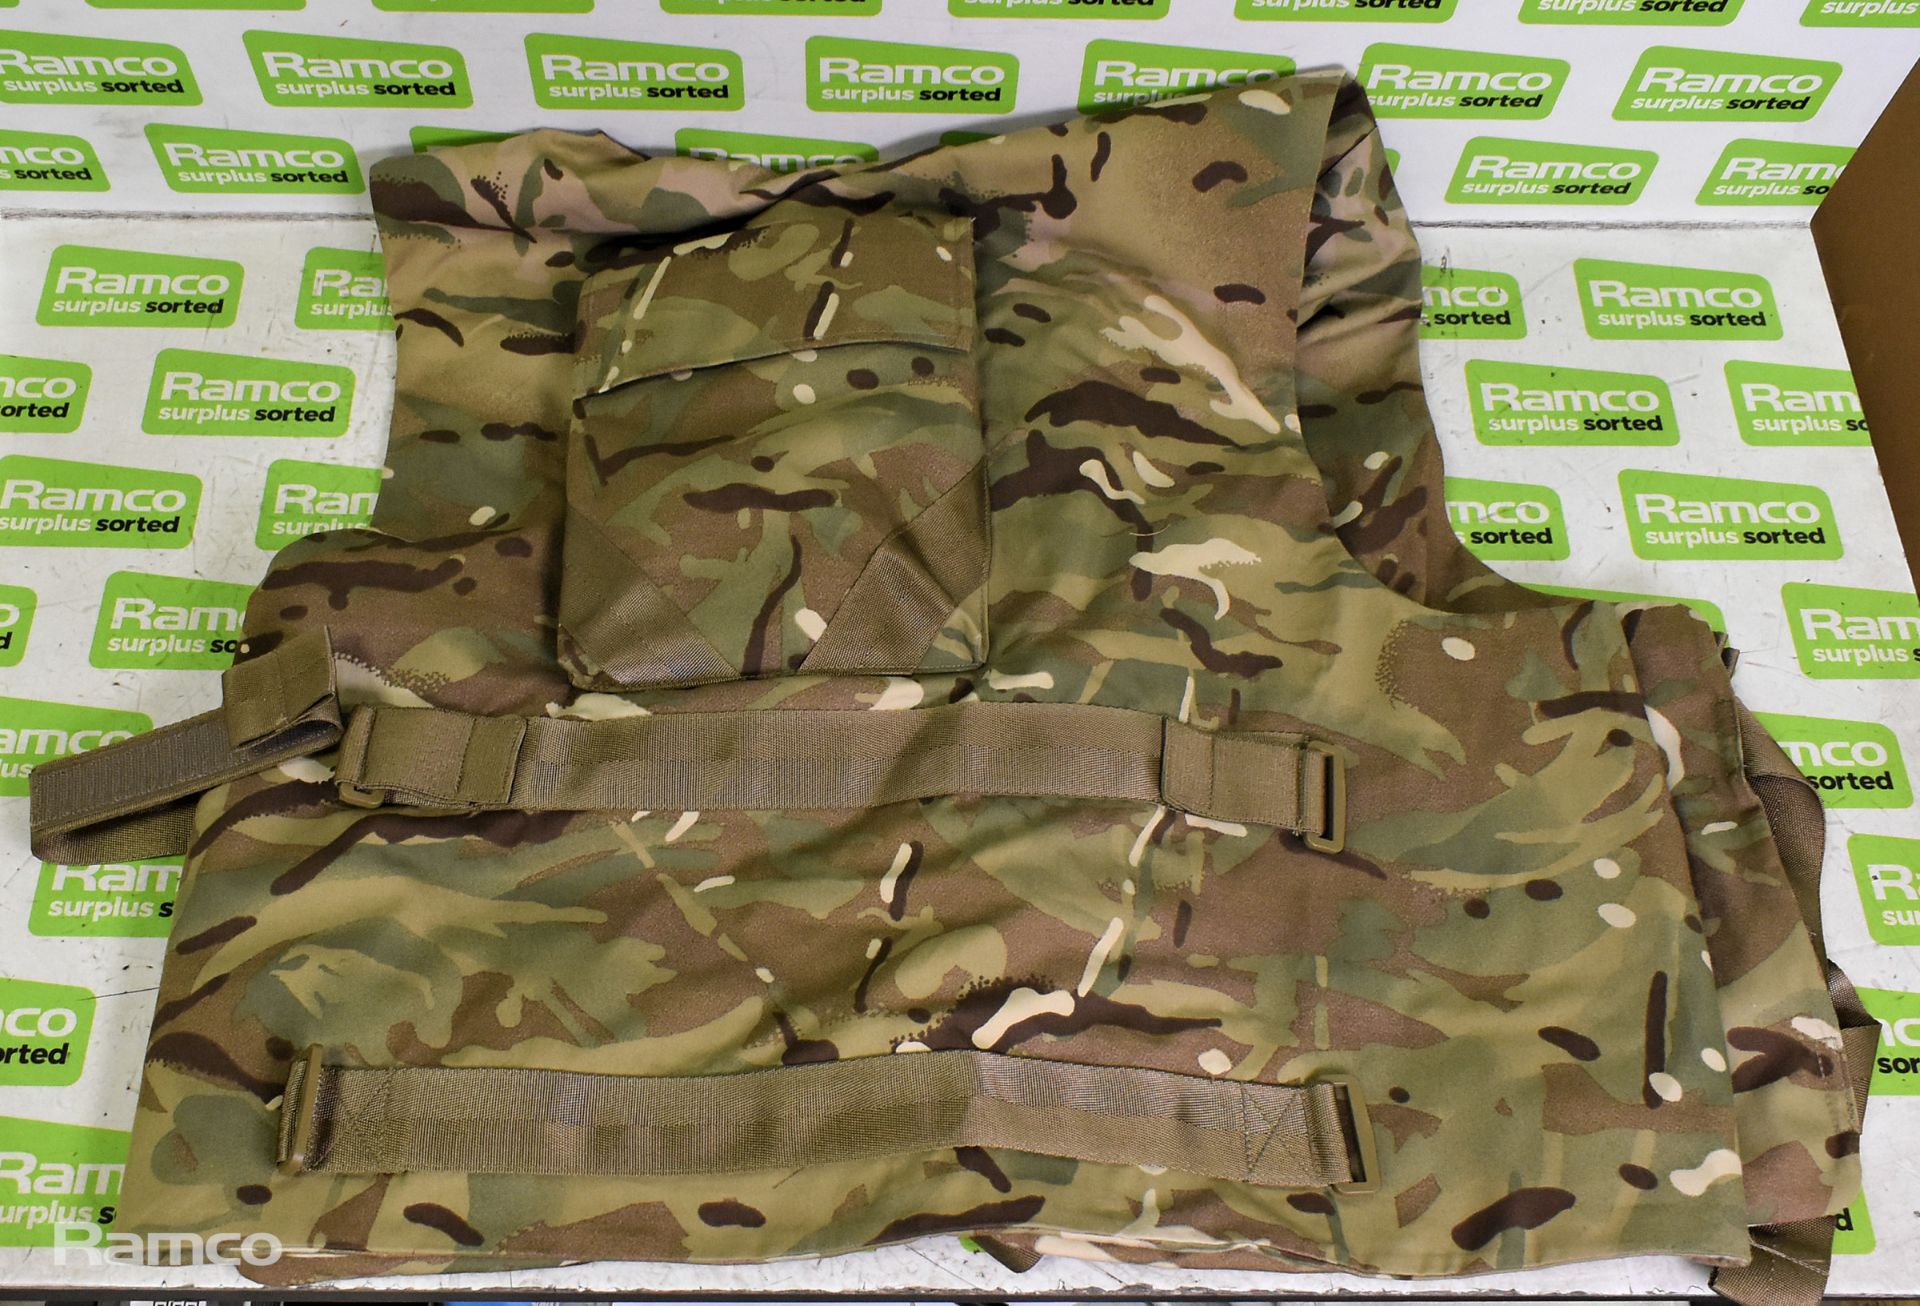 British Army body covers & ammunition pouches - see description for details - Image 16 of 16